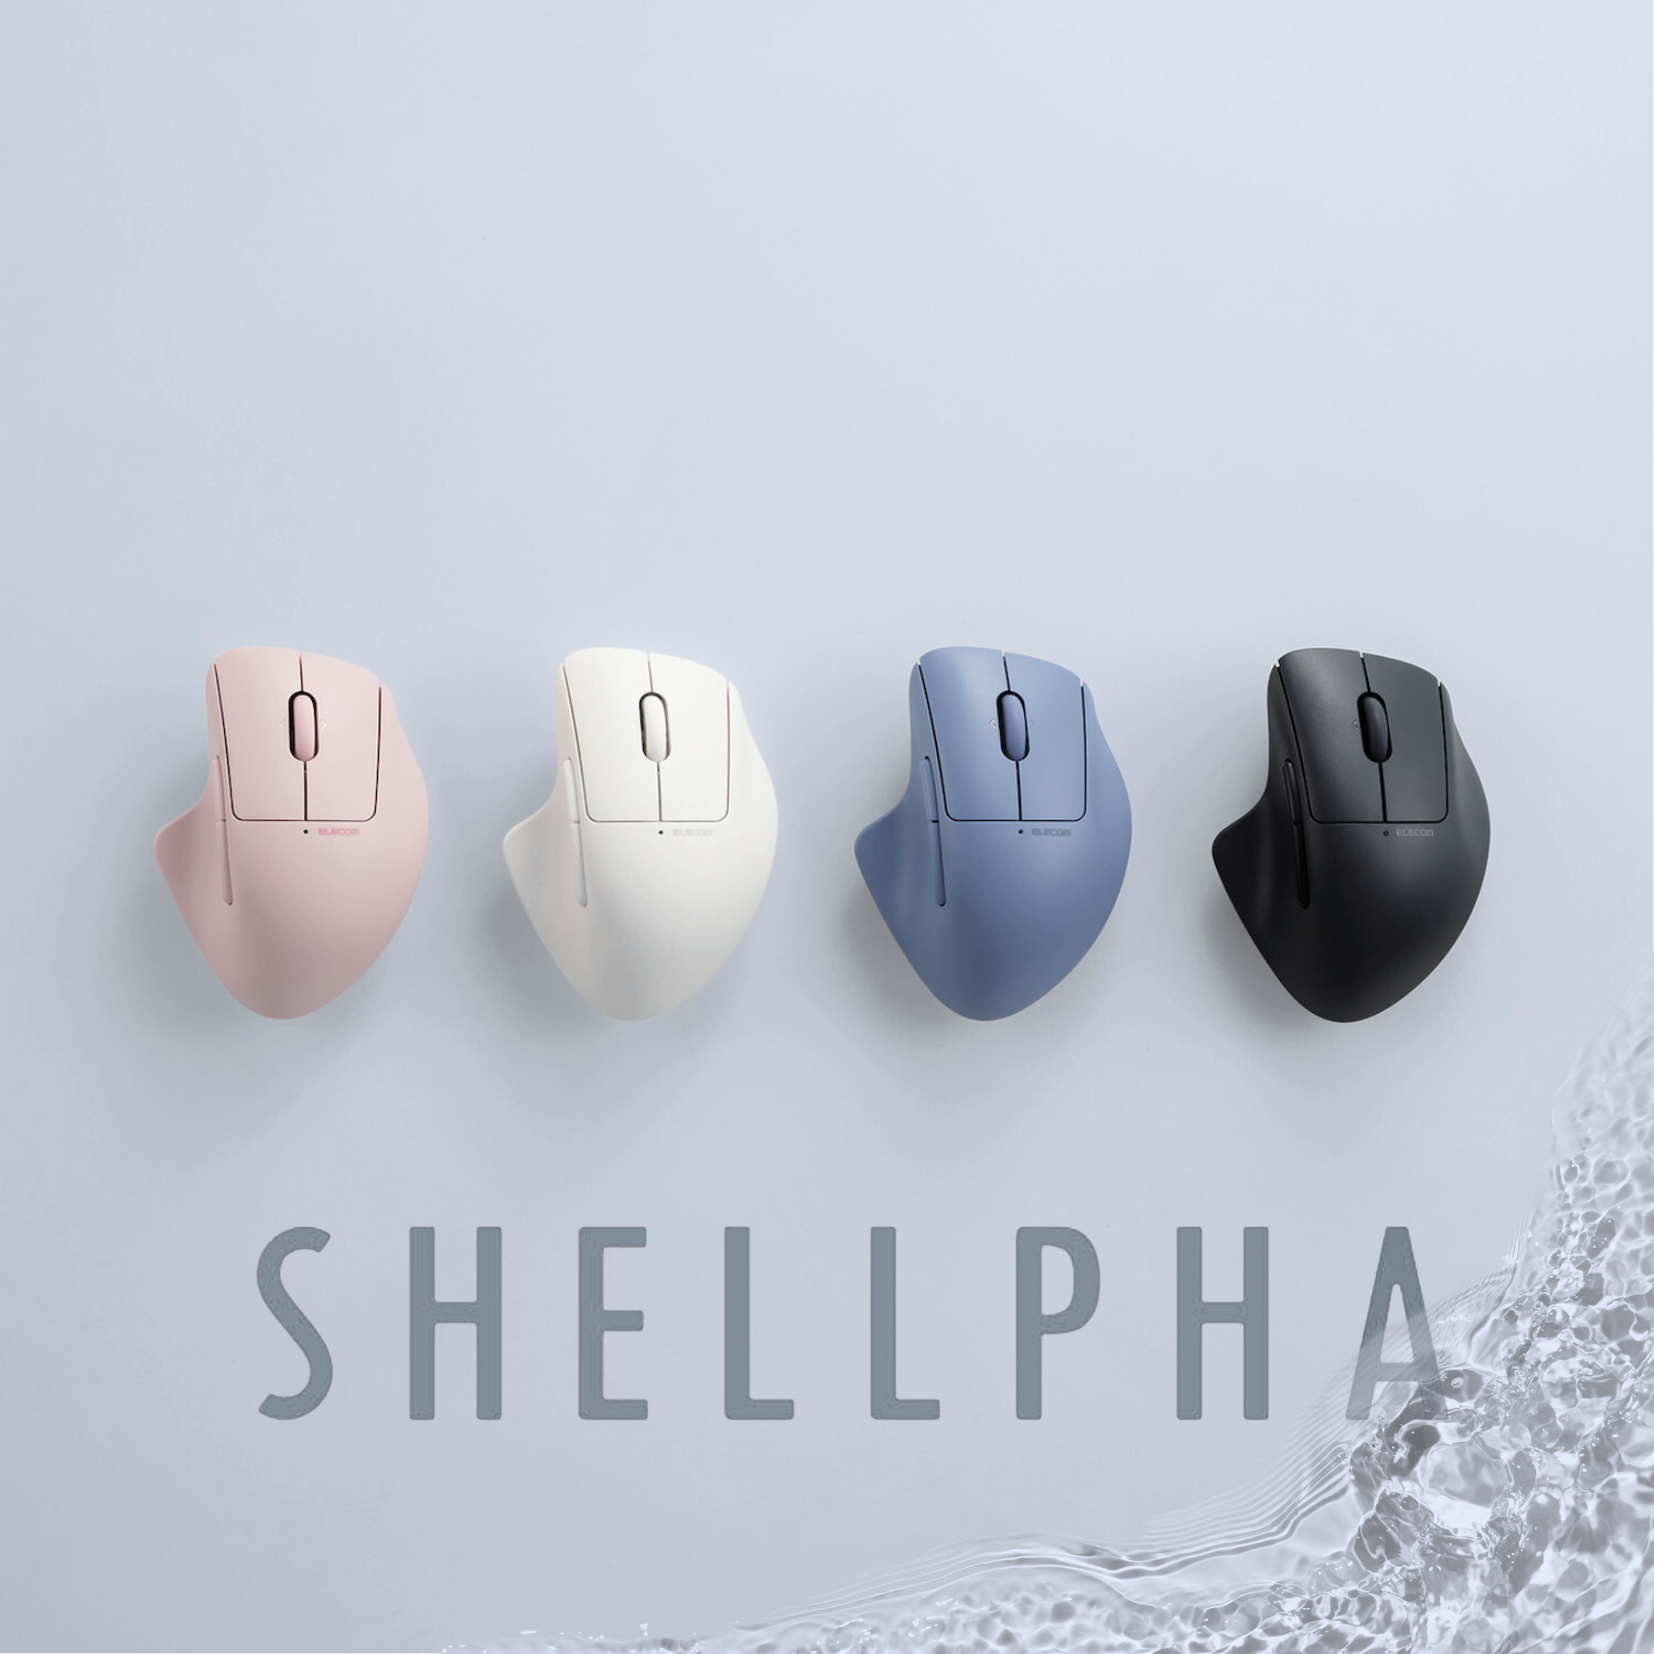 Introducing SHELLPHA: ELECOM USA's Natural Fit Mouse Inspired by Nature